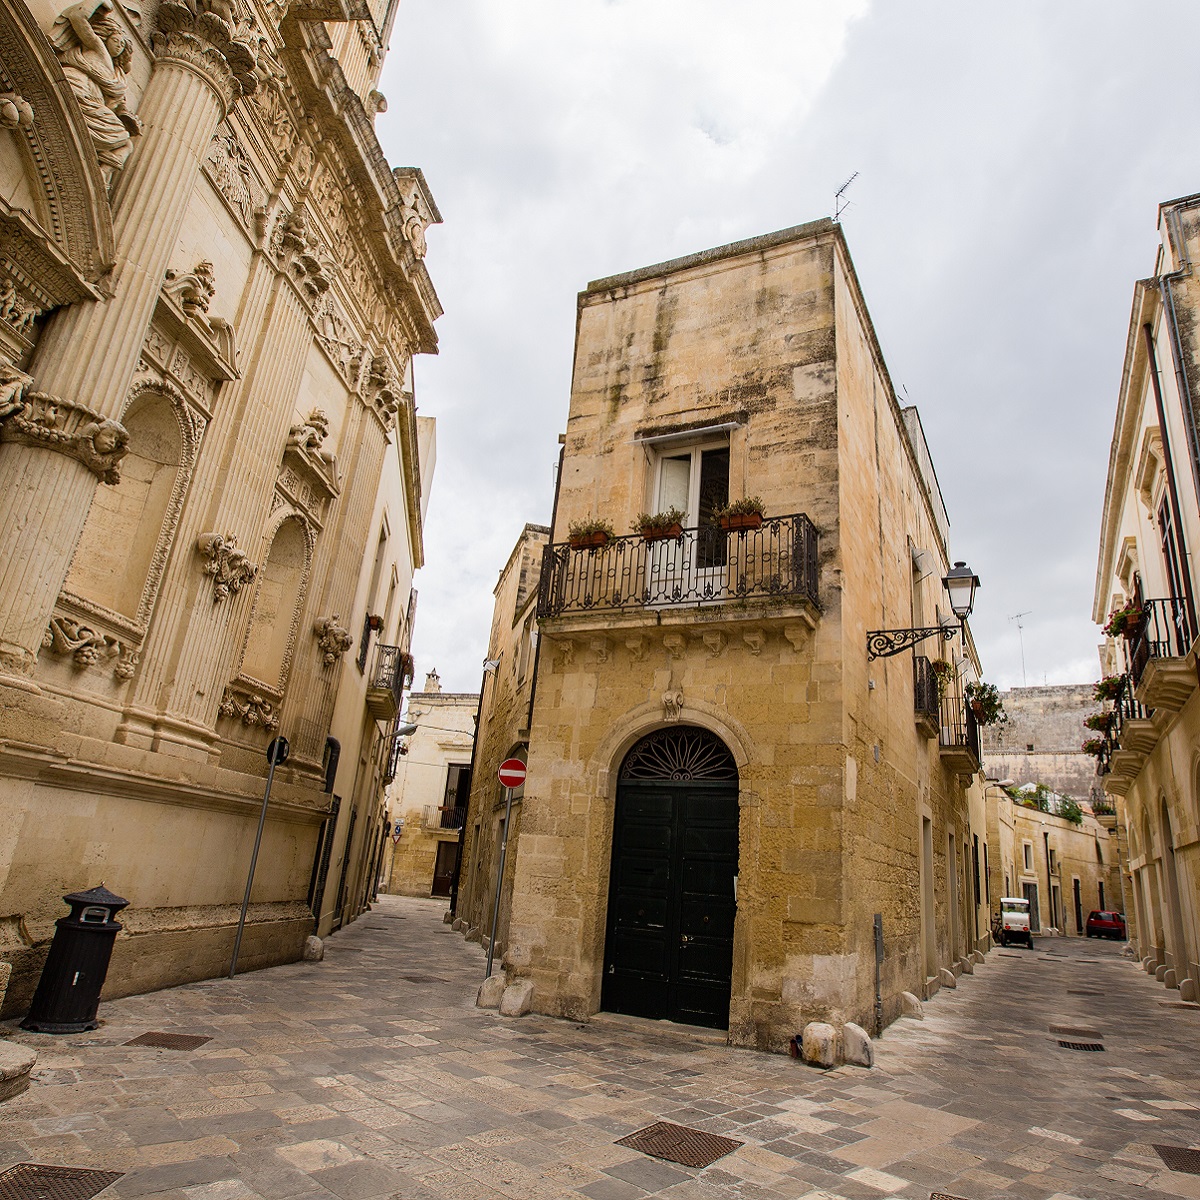 An empty stone street and historic stone buildings in Lecce, Italy